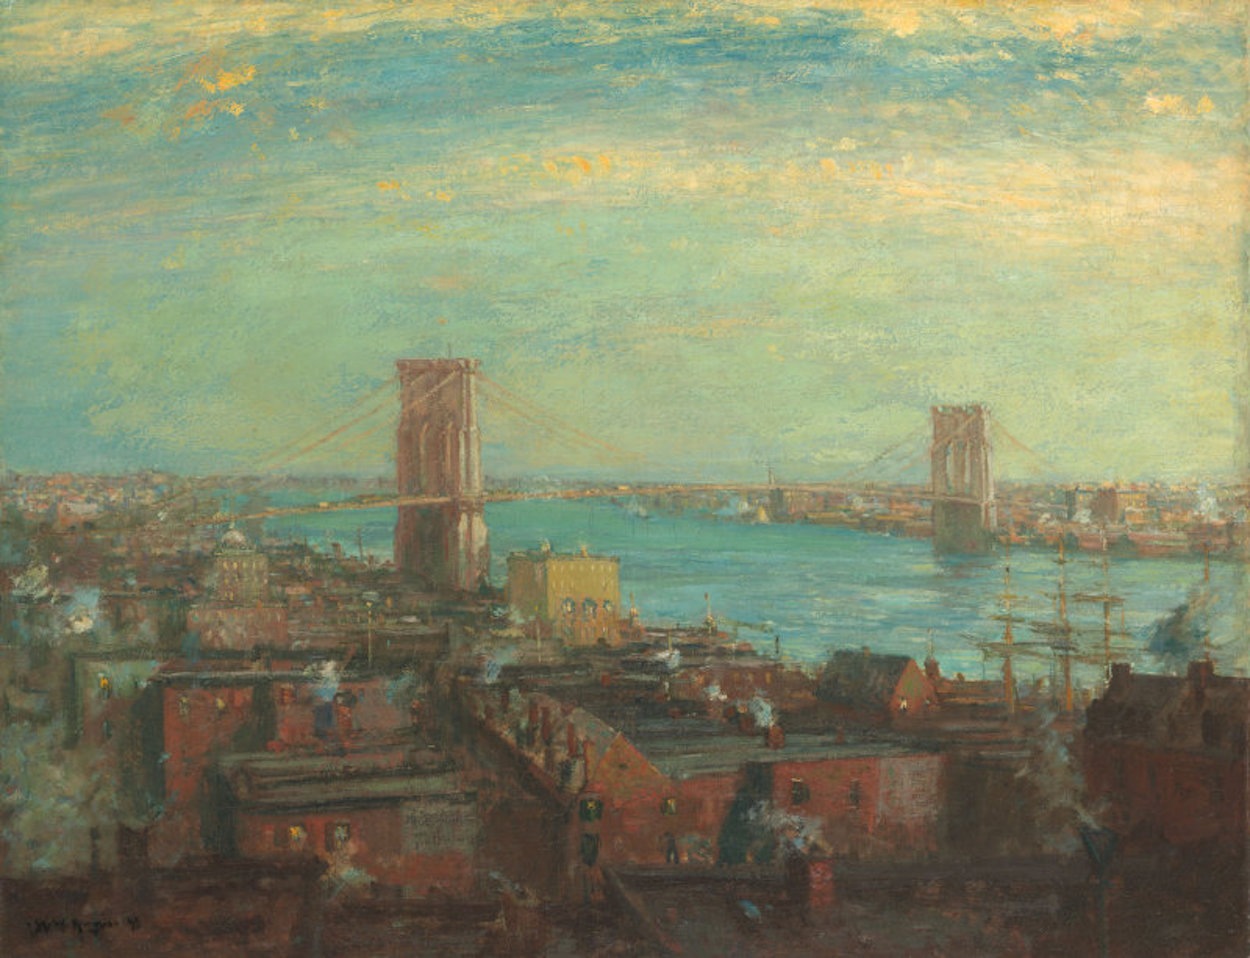 Ponte do Brooklyn by Henry Ward Ranger - 1899 Art Institute of Chicago